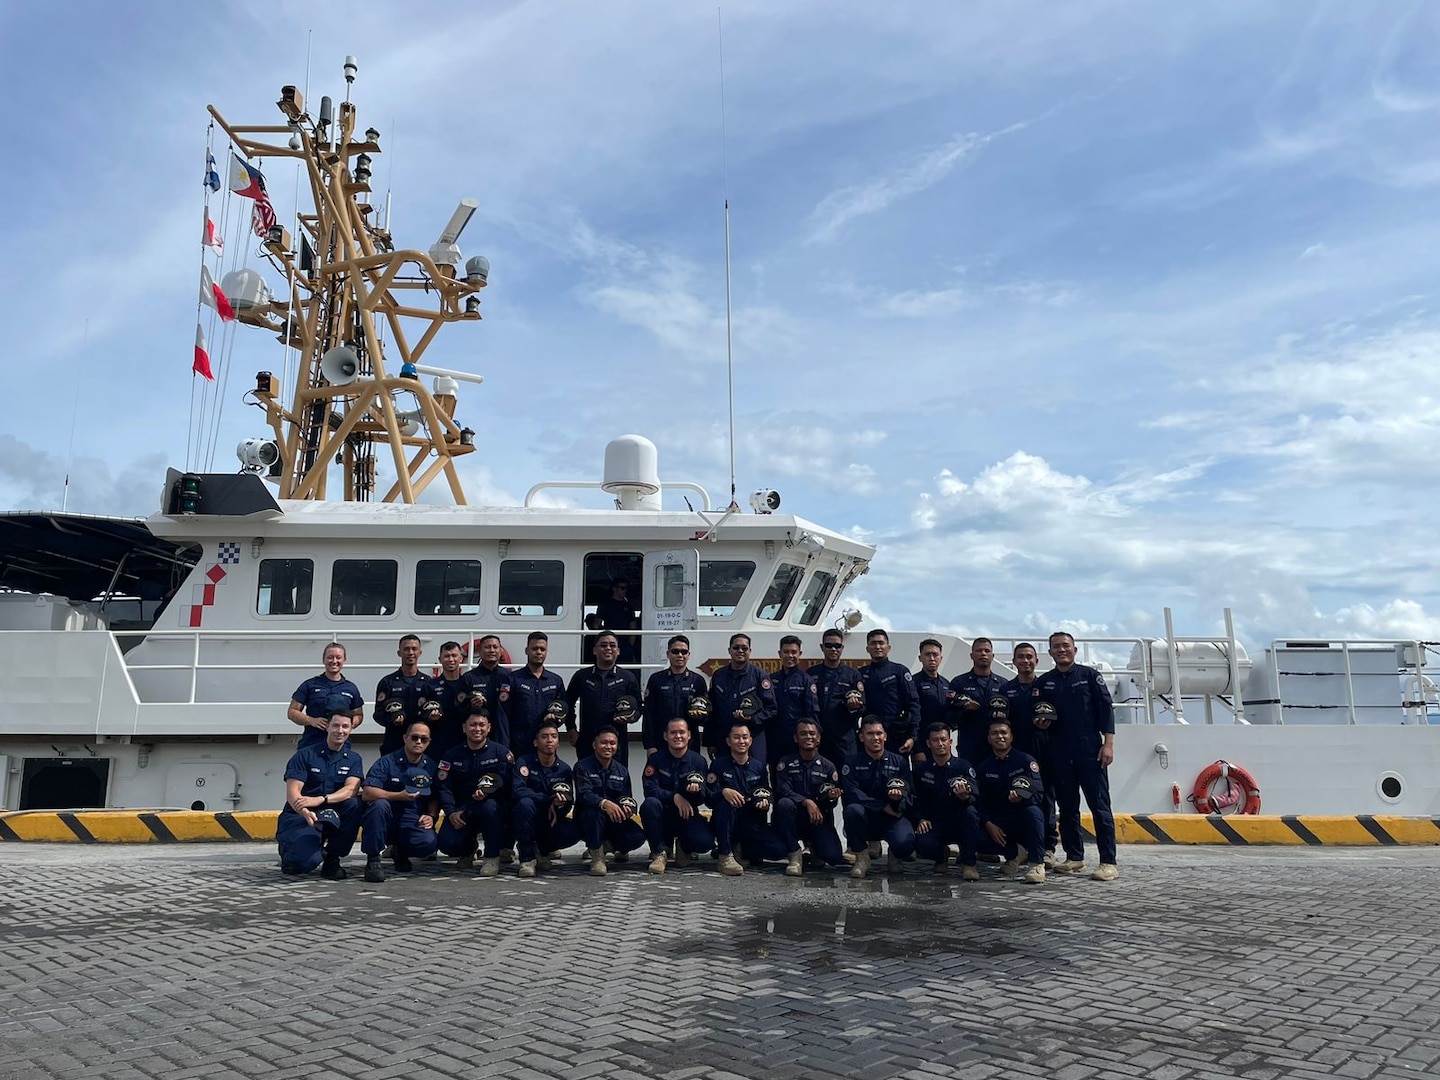 Members of USCGC Frederick Hatch (WPC 1143) stand for a photo with colleagues from the Philippine Coast Guard before departing from the pier in Tacloban, Philippines, on Oct. 23, 2023. In a historic first, the USCGC Frederick Hatch (WPC 1143) visited Tacloban, Philippines, from Oct. 19 to 23, 2023, and the crew conducted engagements marking a significant milestone in the enduring relationship between the United States and the Philippines. (U.S. Coast Guard photo by Lt. Anna Vacarro)